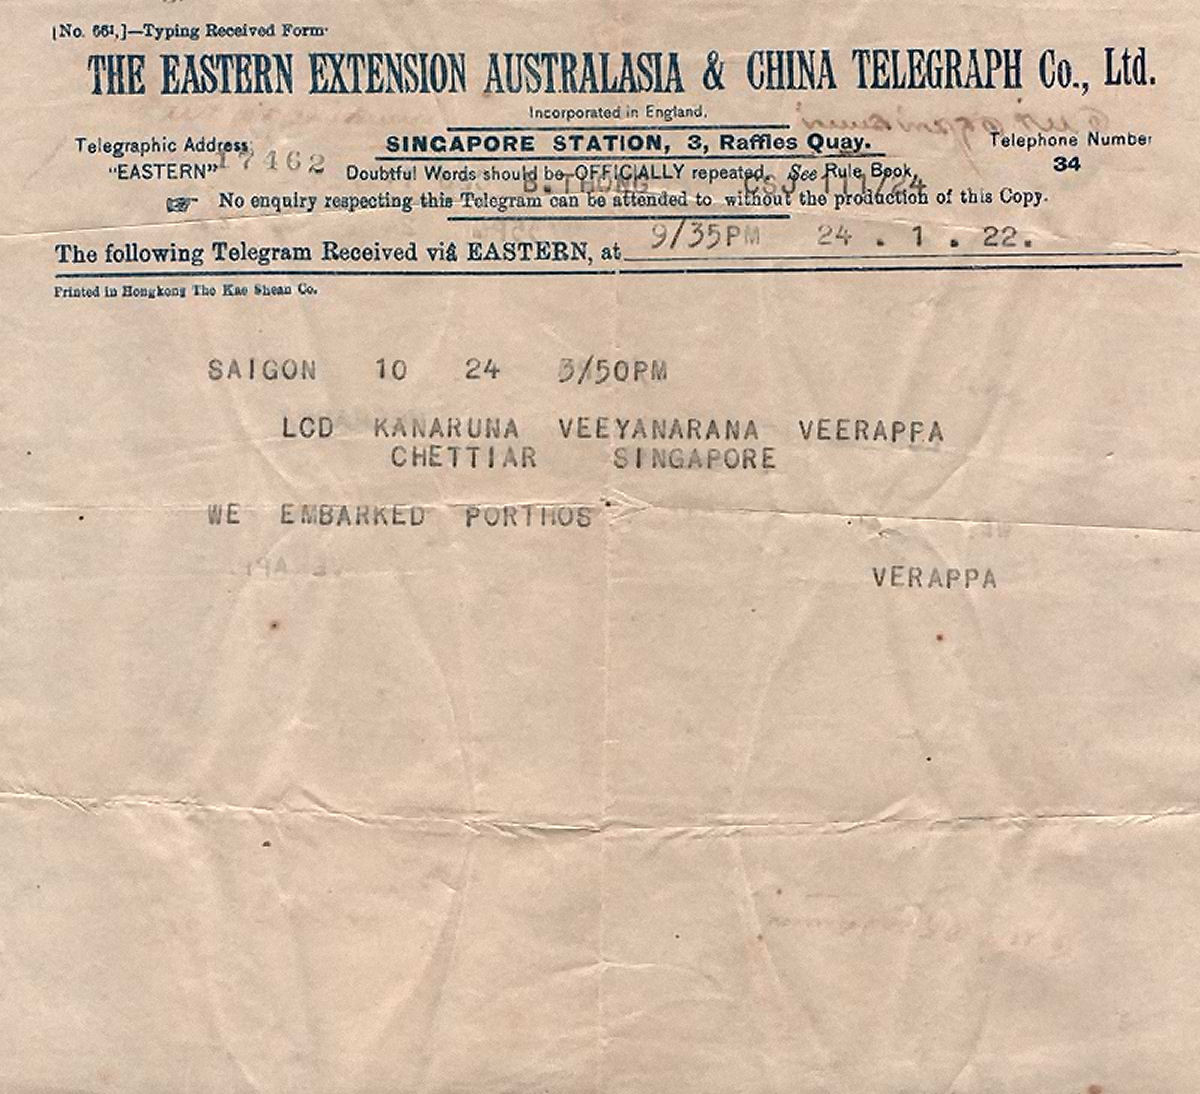 EETC Received Form 1922